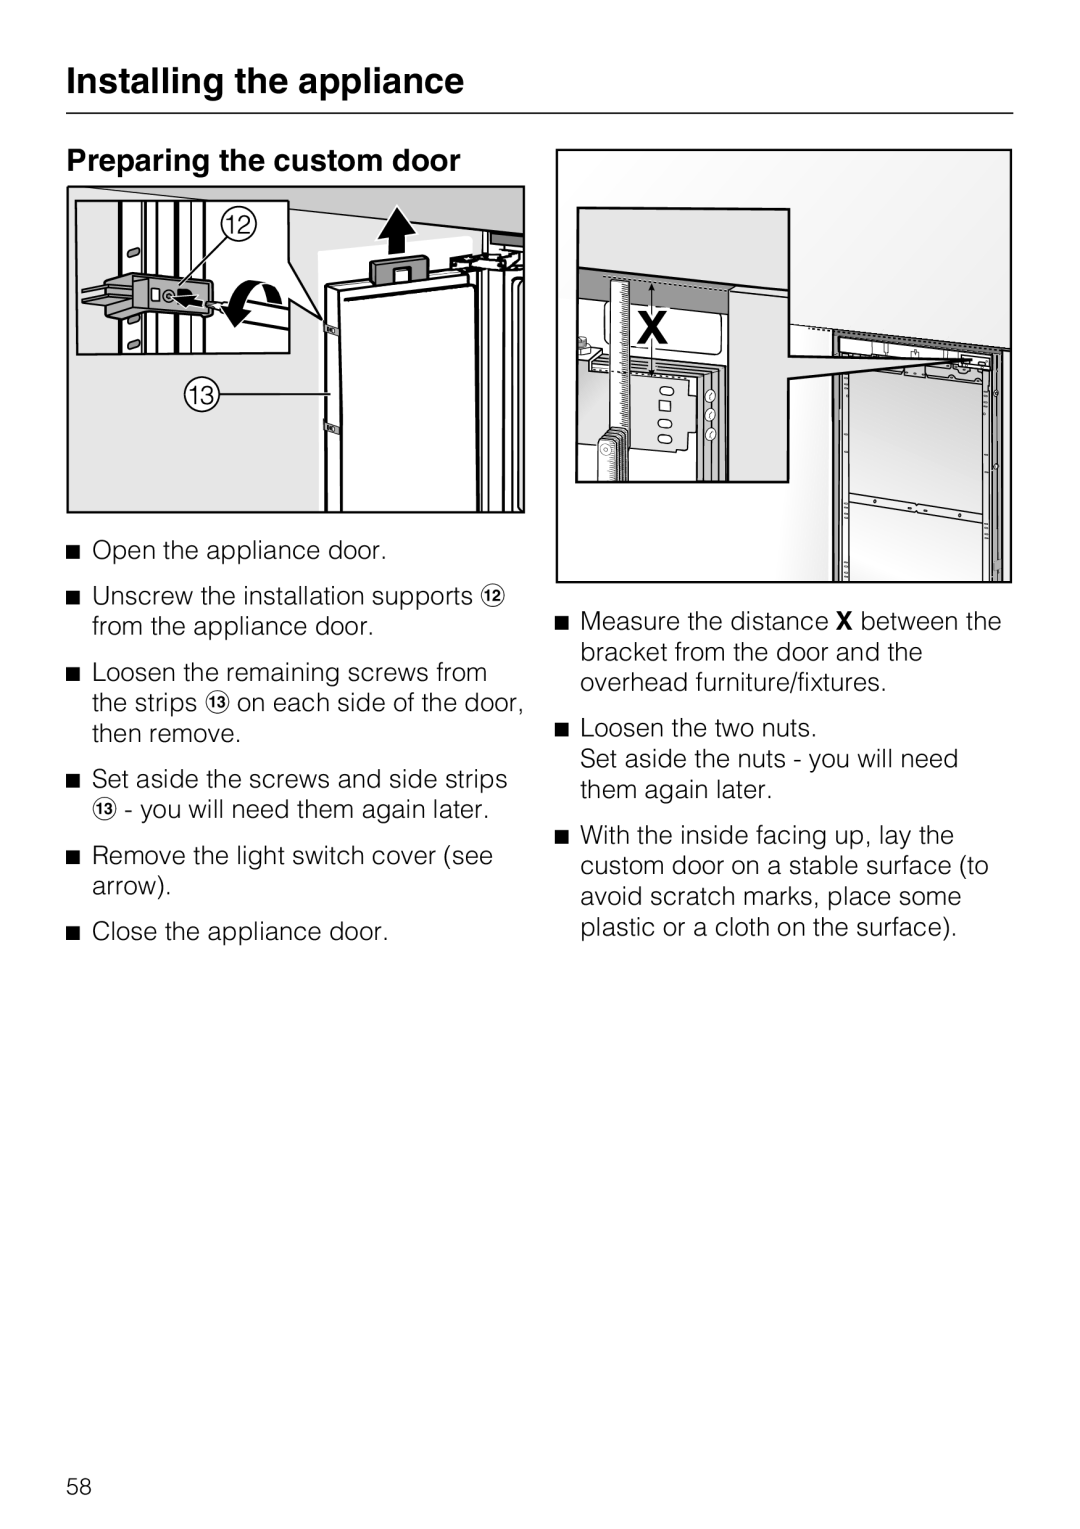 Miele 09 920 570 installation instructions Preparing the custom door, Installing the appliance 